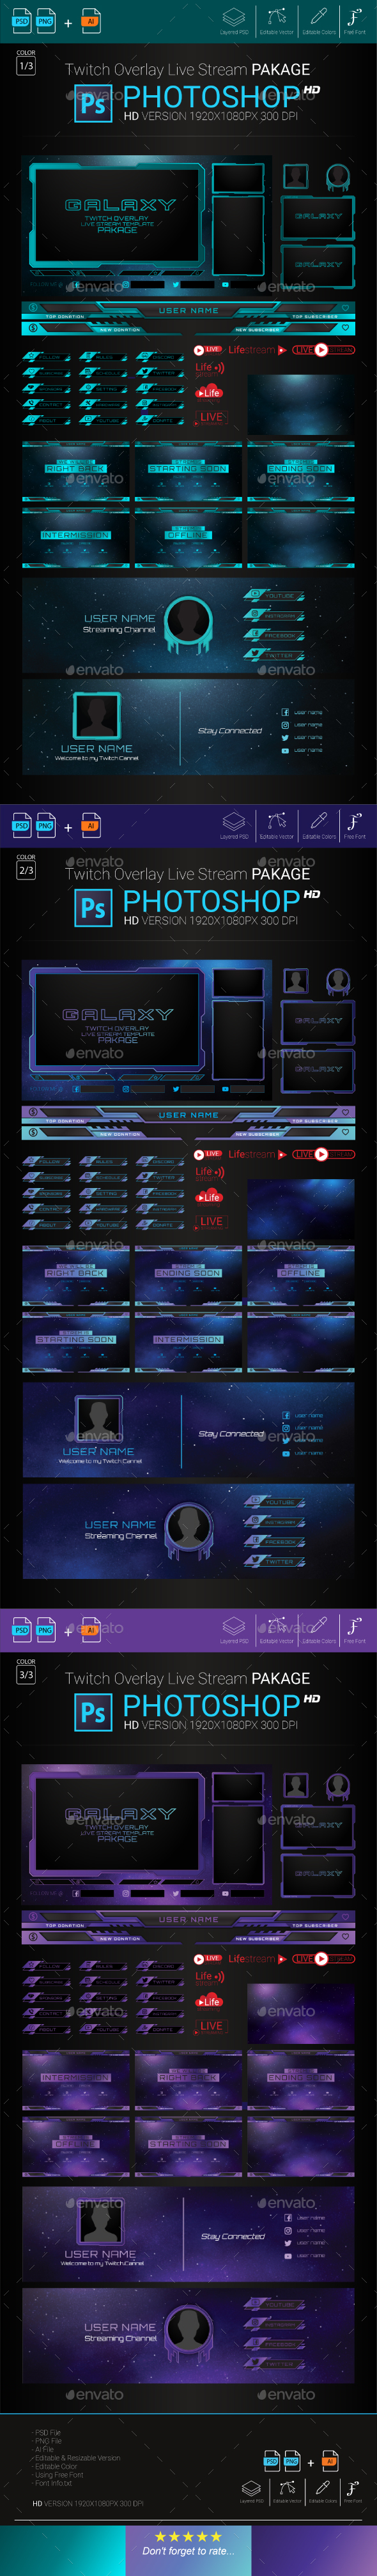 Galaxy Twitch Overlay Live Stream Photoshop Template Pack